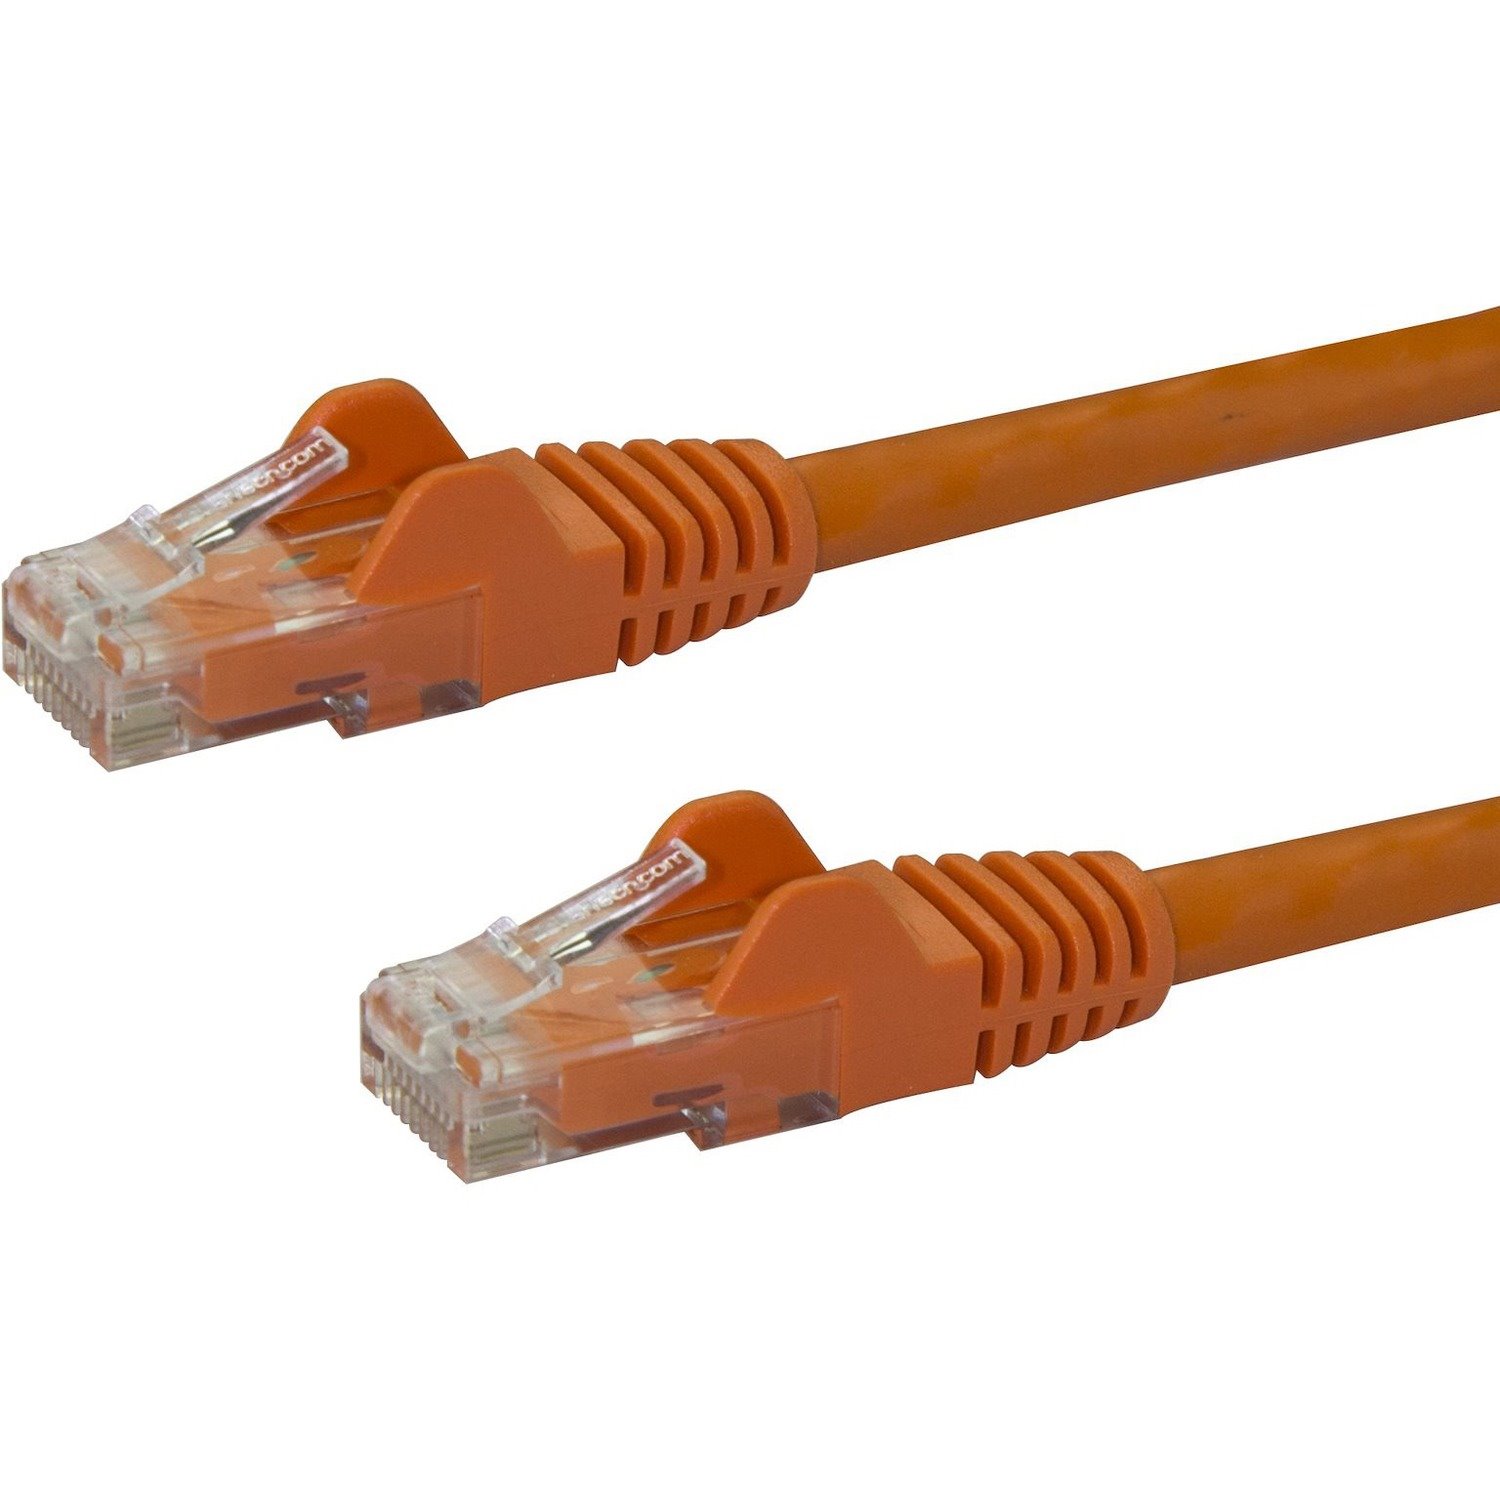 StarTech.com 5ft CAT6 Ethernet Cable - Orange Snagless Gigabit - 100W PoE UTP 650MHz Category 6 Patch Cord UL Certified Wiring/TIA